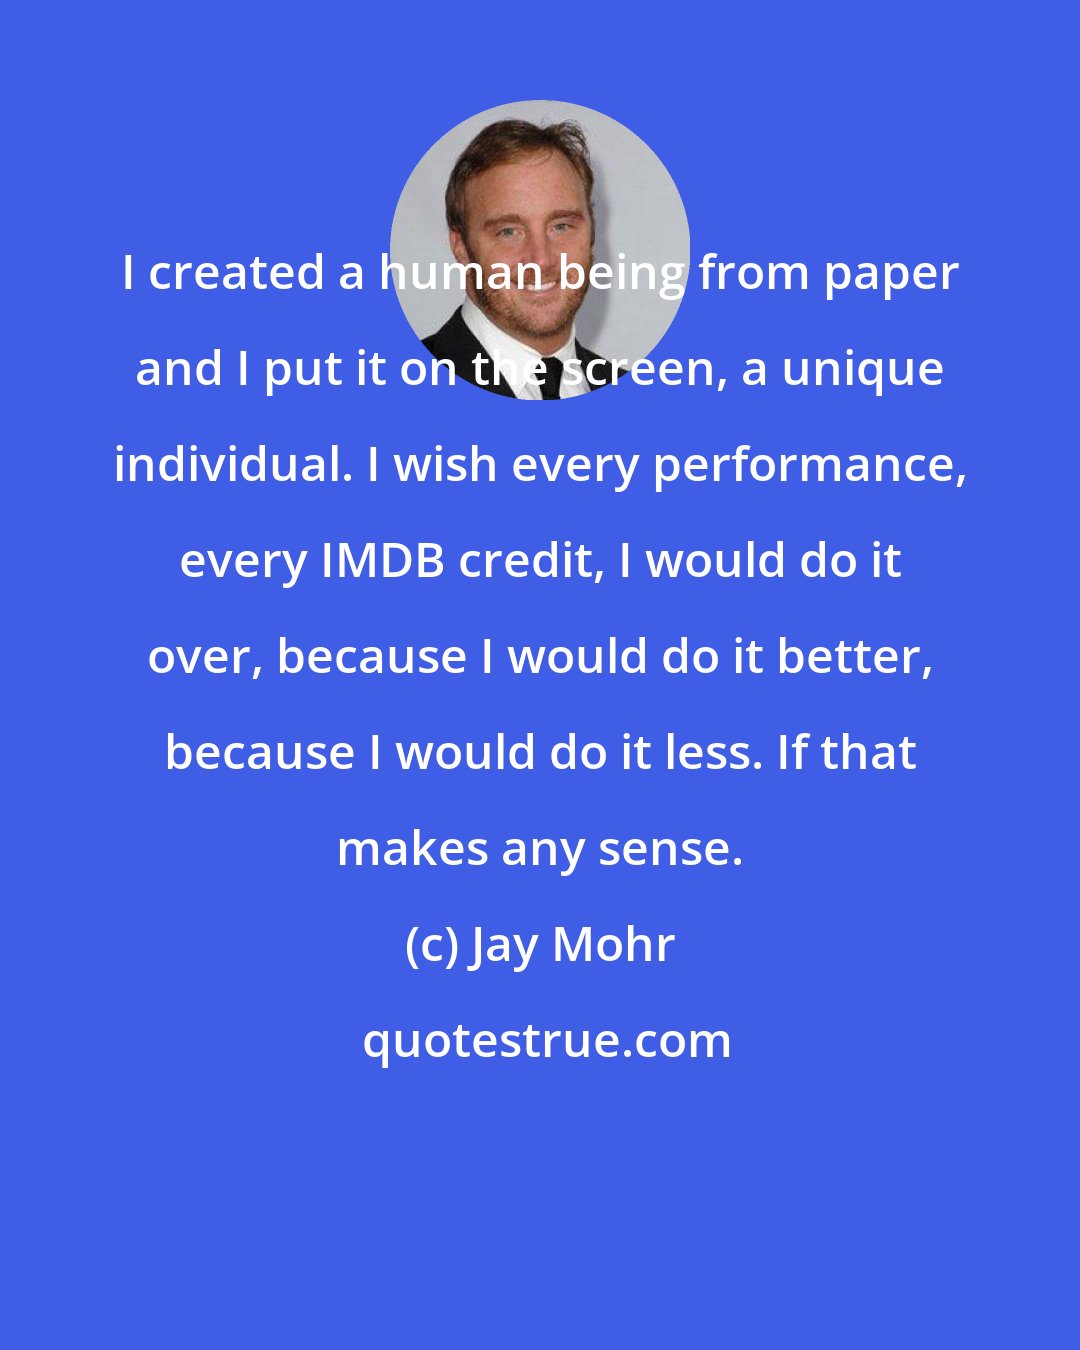 Jay Mohr: I created a human being from paper and I put it on the screen, a unique individual. I wish every performance, every IMDB credit, I would do it over, because I would do it better, because I would do it less. If that makes any sense.